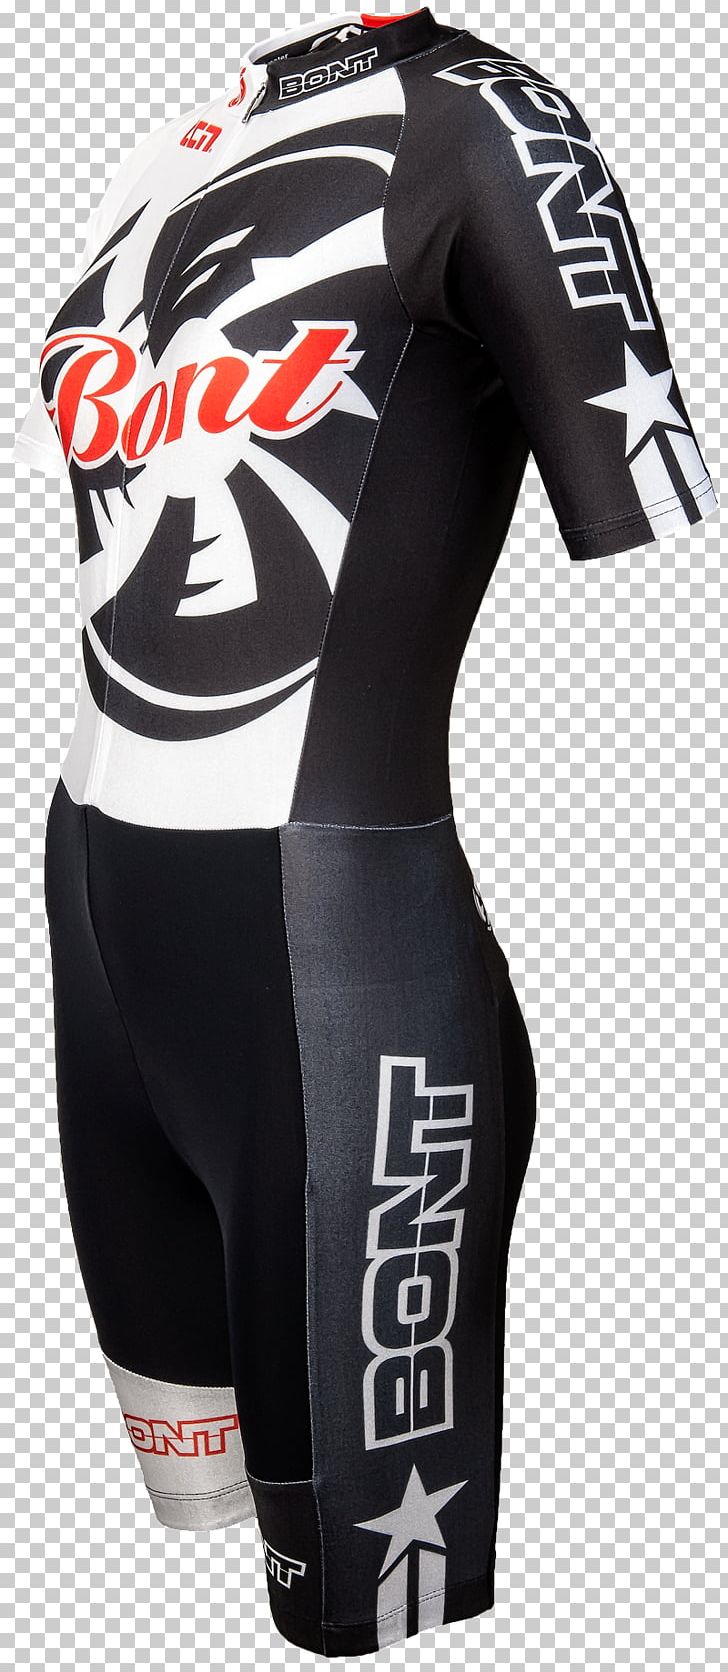 Fur Clothing Racing Suit Personal Protective Equipment PNG, Clipart, Bicycle, Bicycle Clothing, Bicycles Equipment And Supplies, Black, Clothing Free PNG Download